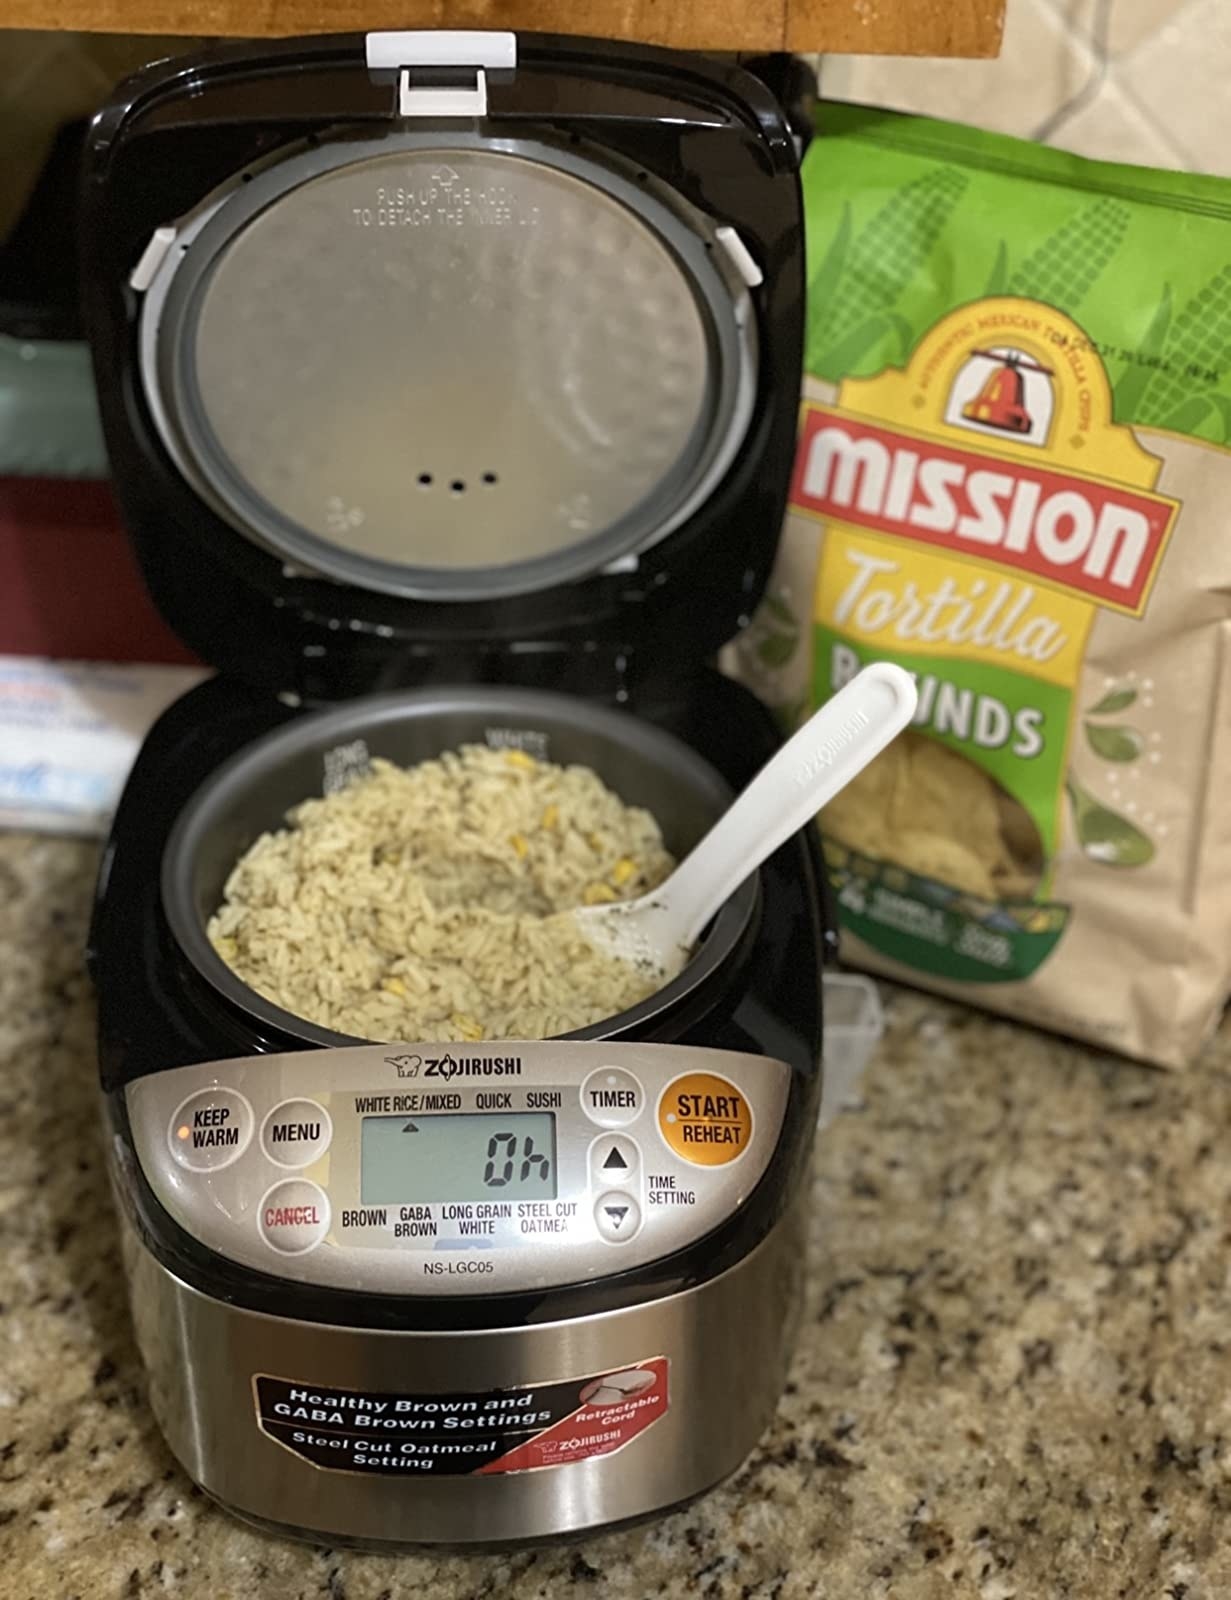 Reviewer photo of the rice cooker with rice inside